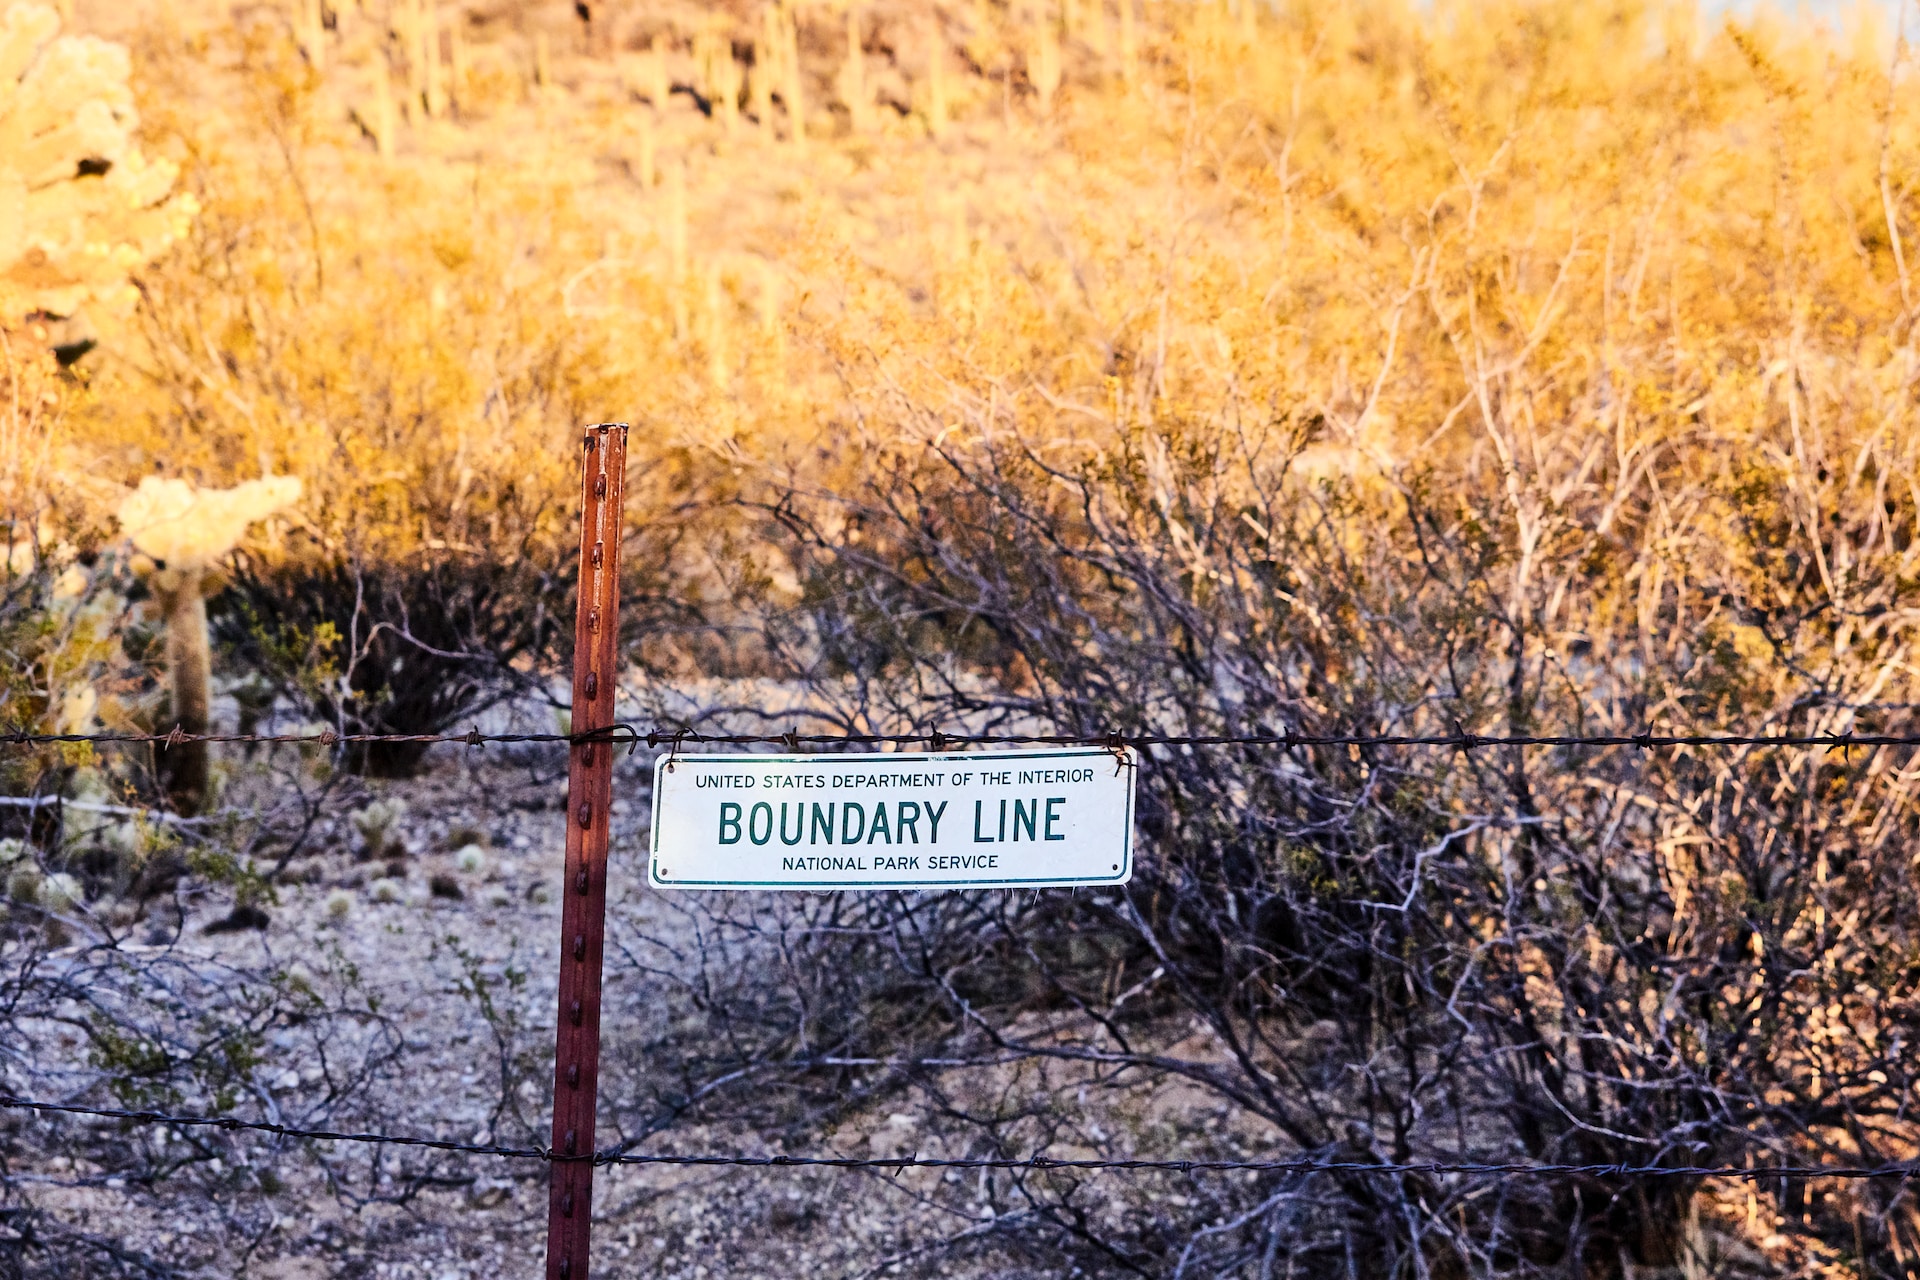 The boundary gap: some thoughts